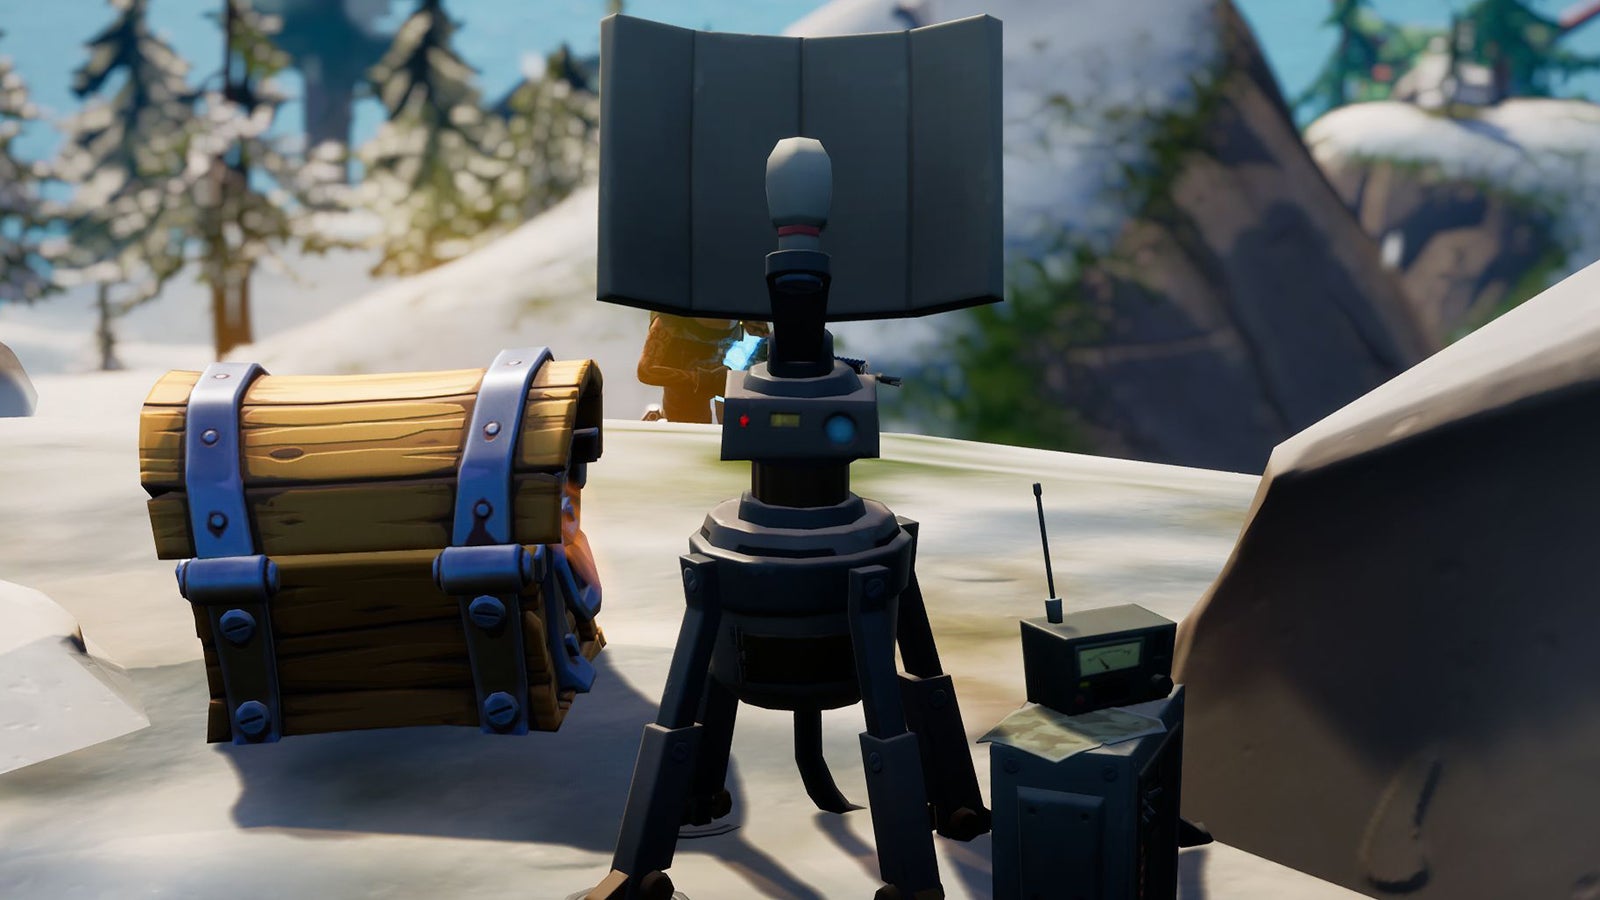 Image for Where to collect the signal jammers in Fortnite